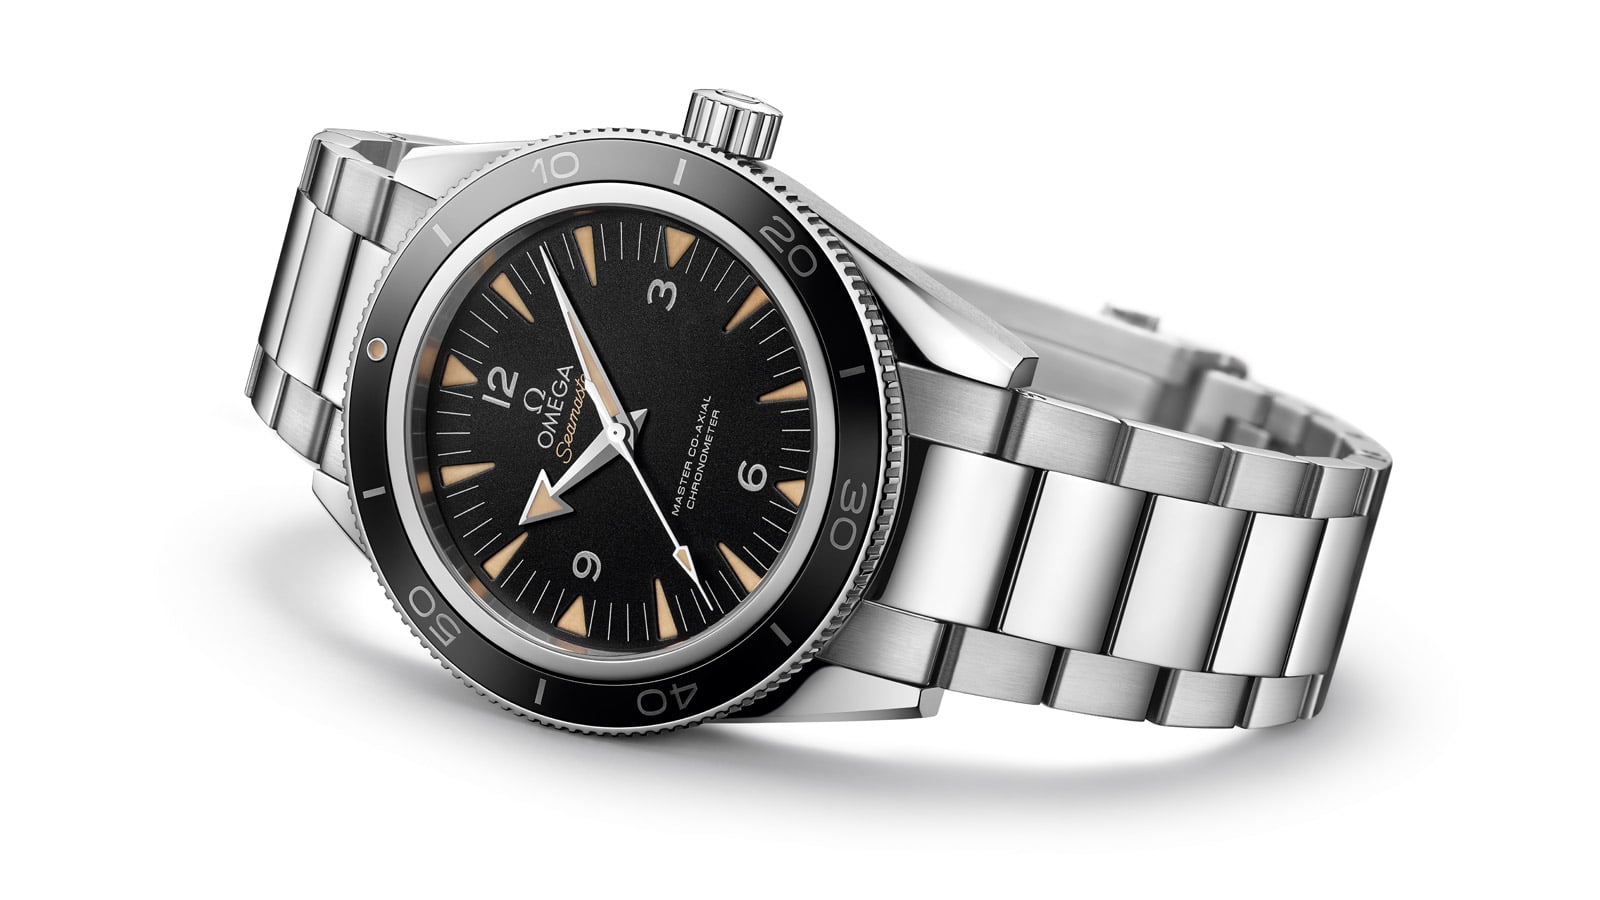 Omega Seamaster 300 Master Co-Axial Chronometer Chronograph America's Cup Edition Men's Watch 210.30.44.51.03.002